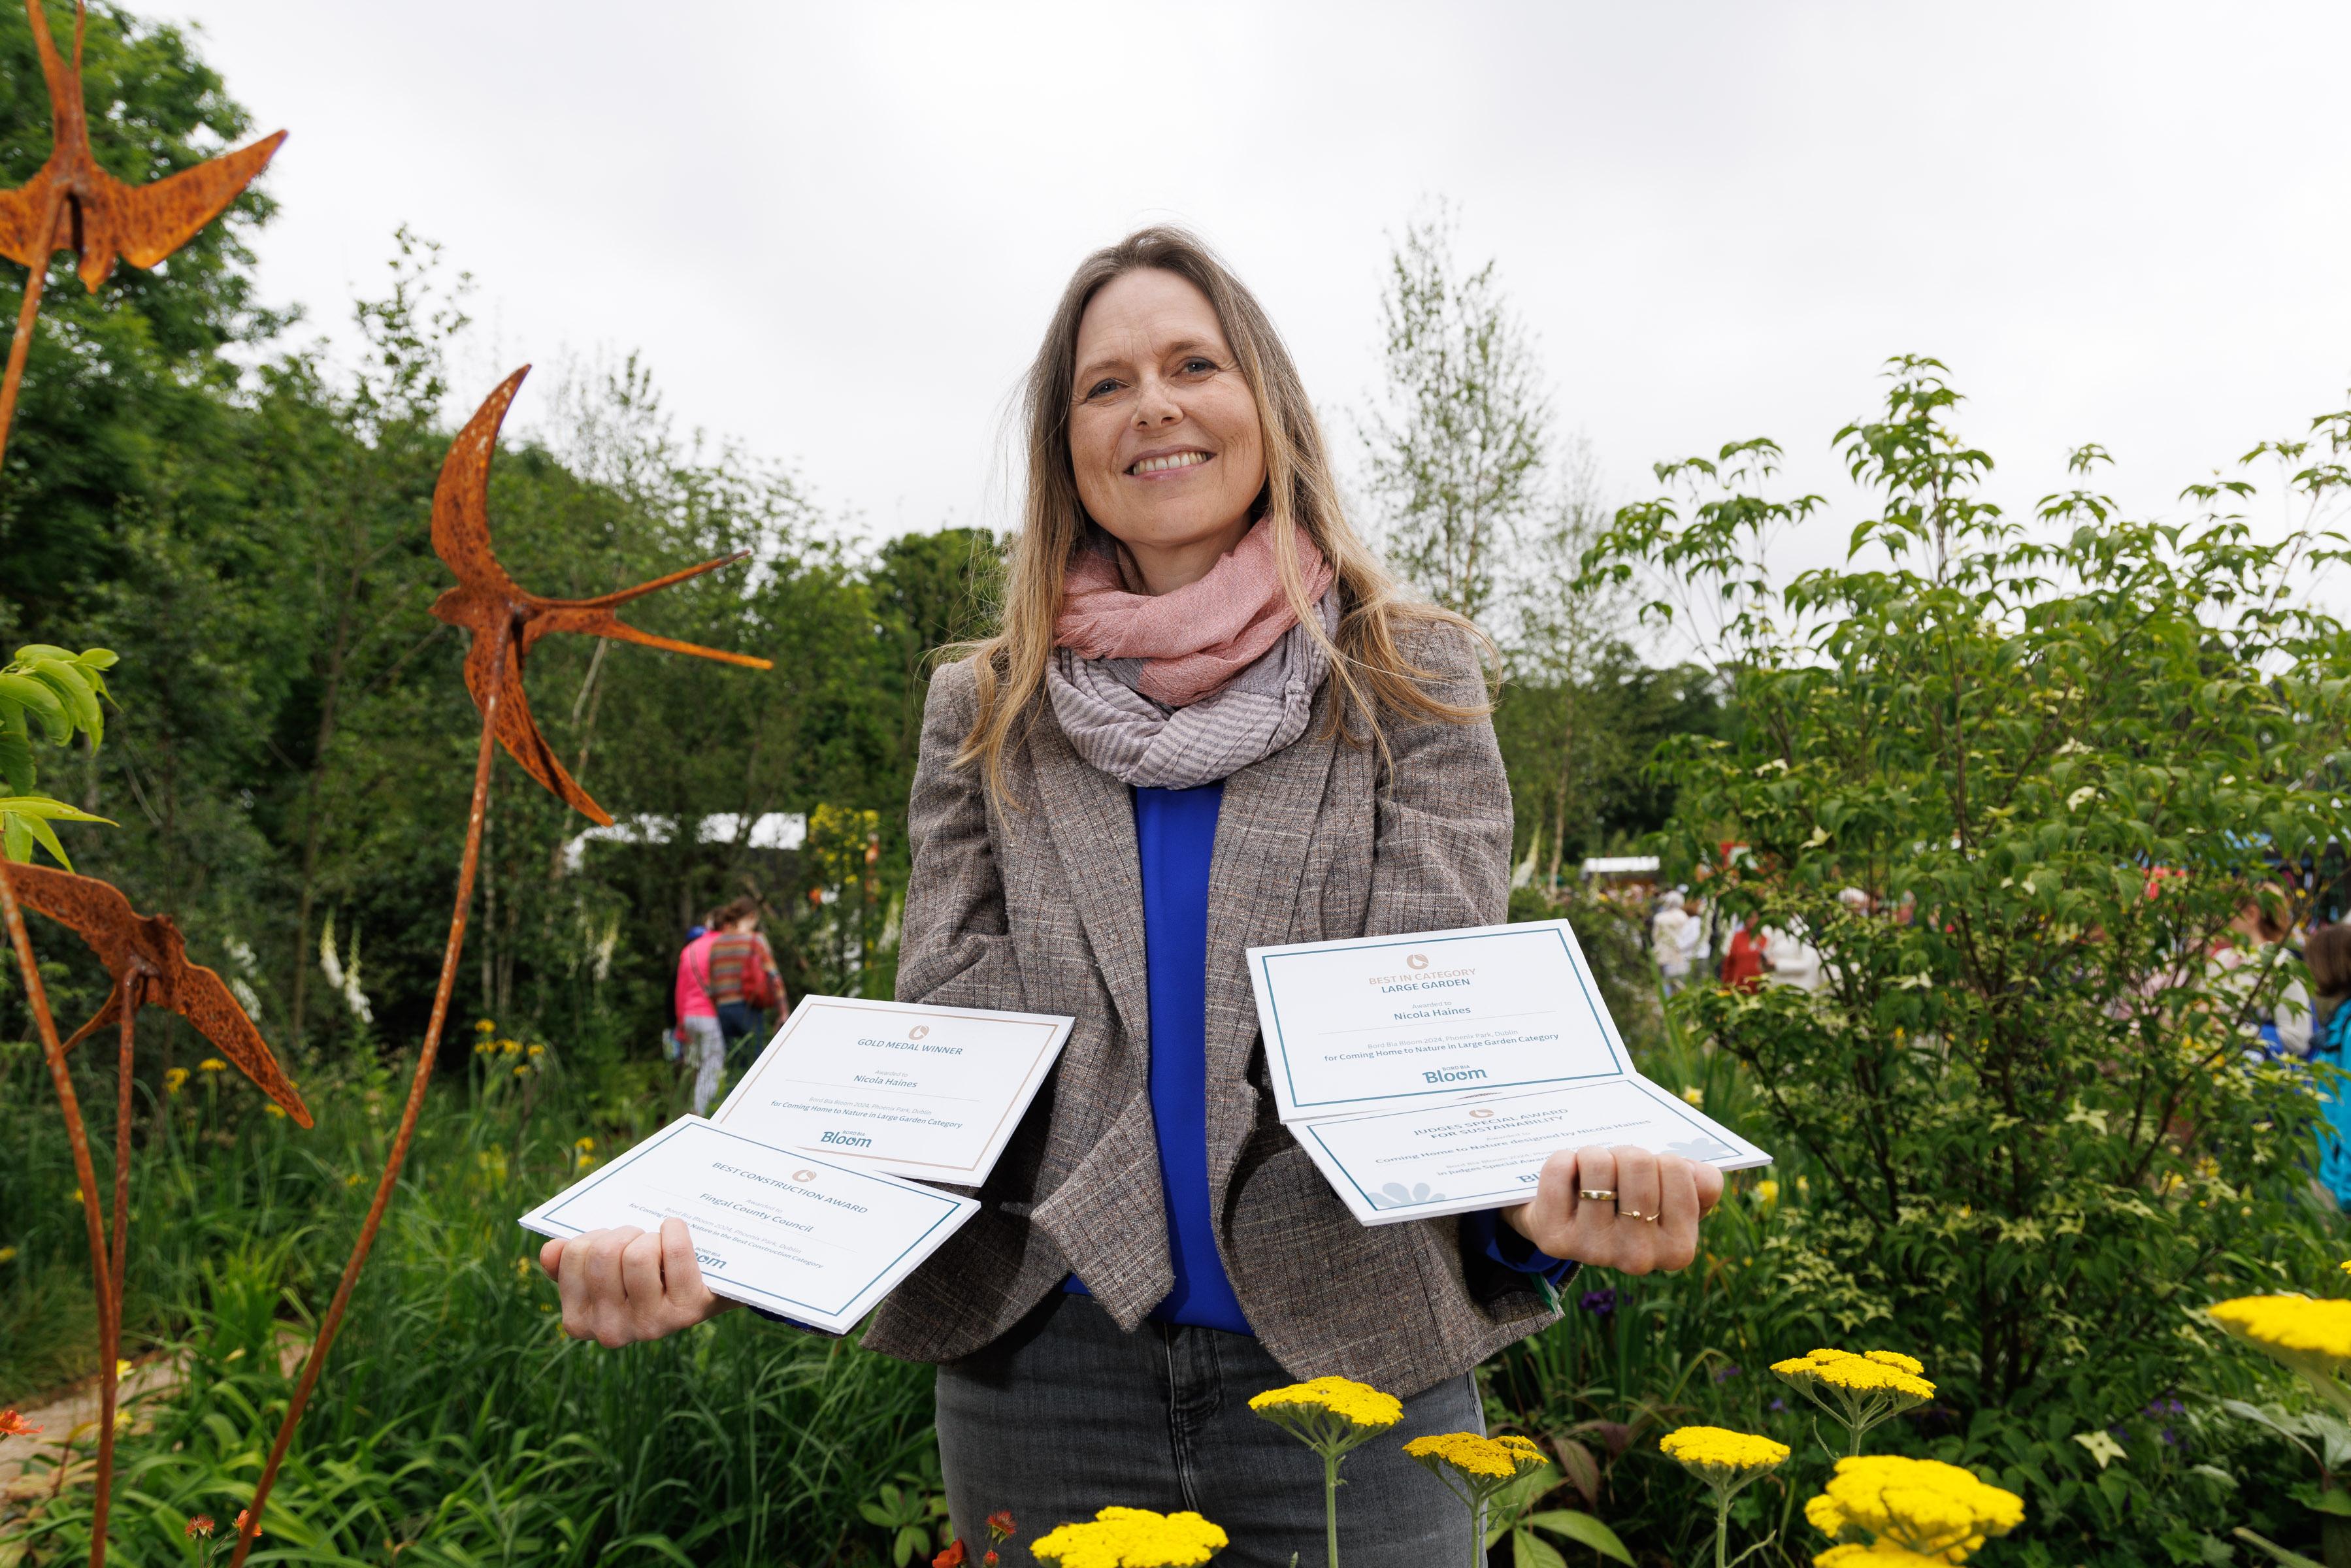 Fingal scoops 4 awards at Bloom